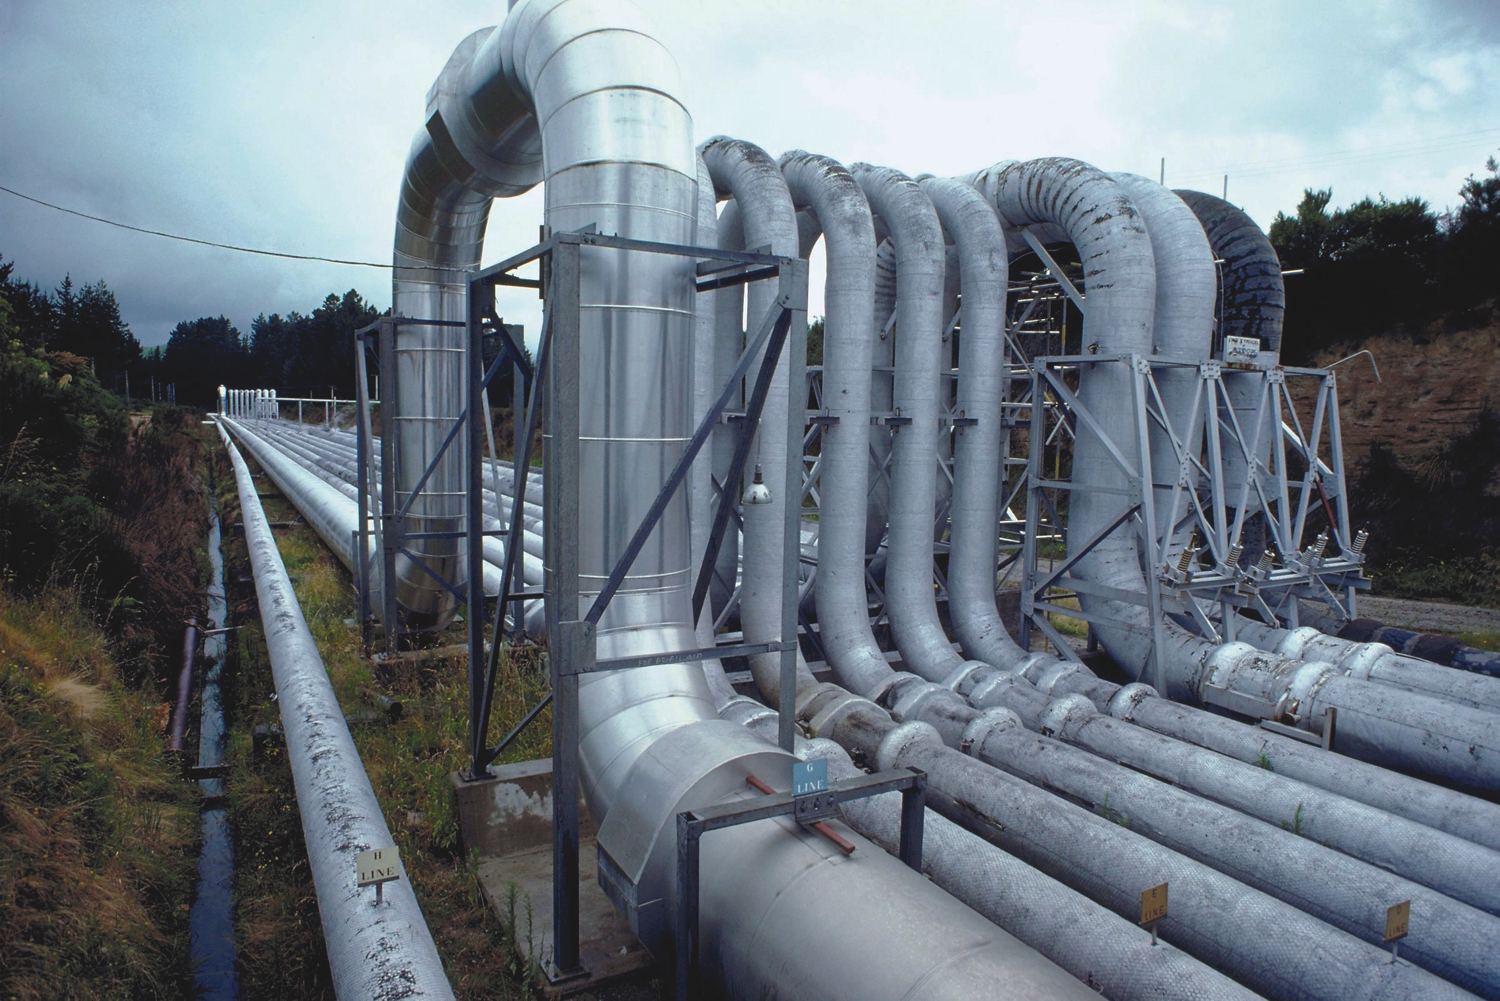 Russia increased natural gas supplies to Armenia in the first half of 2017 by 33% per annum